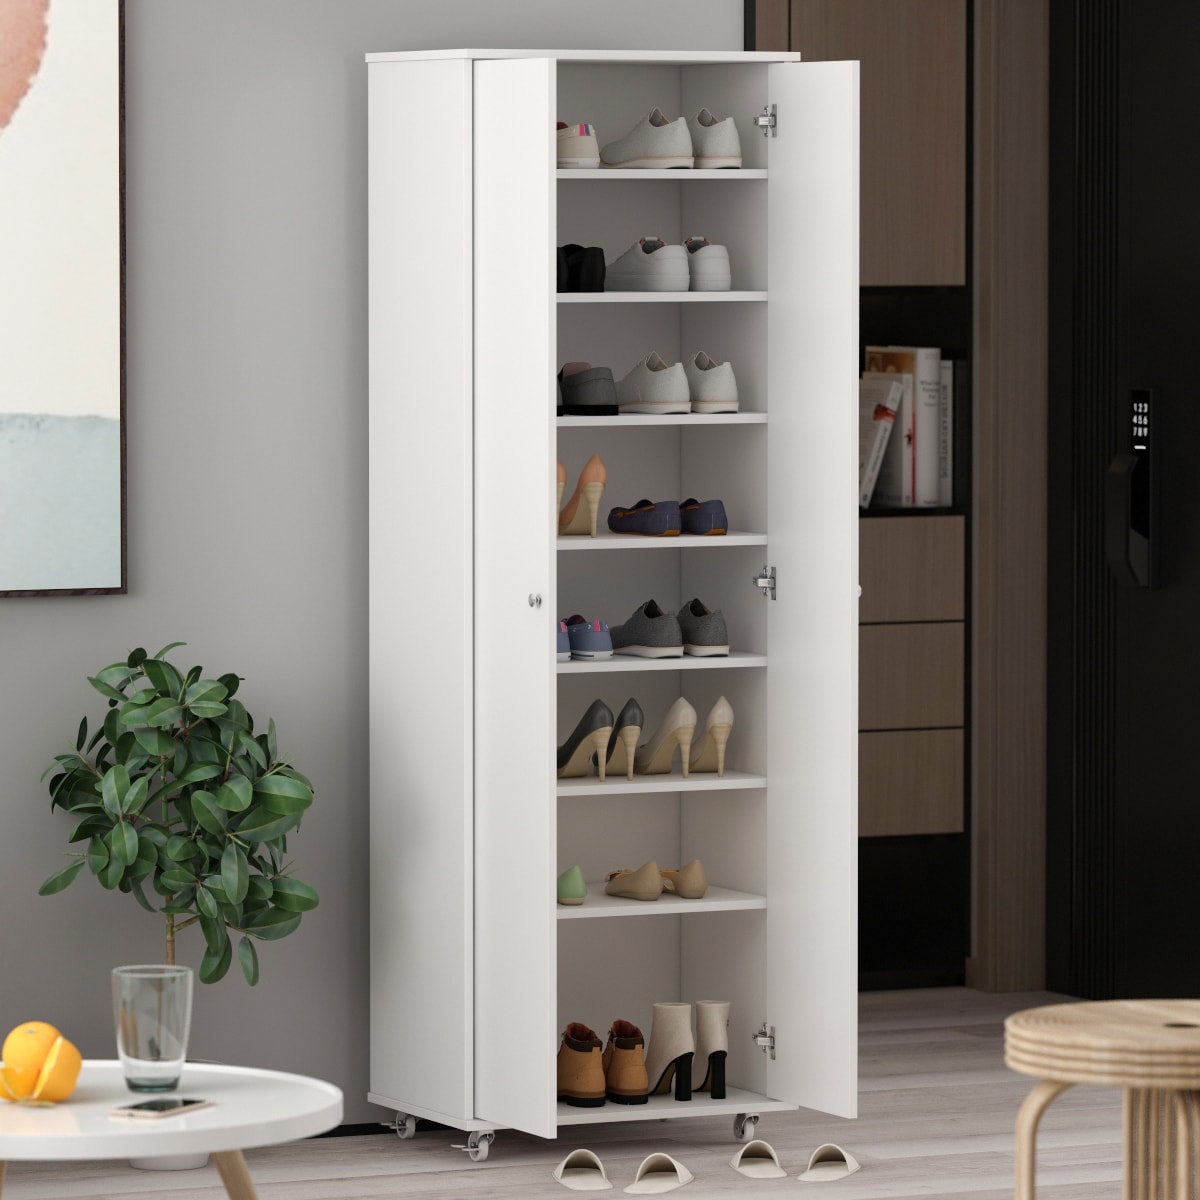 https://ak1.ostkcdn.com/images/products/is/images/direct/1d8364d7452cfd01e496de78673853d8ac5025f1/FAMAPY-71%22H-Tall-Storage-Cabinet%2C-8-Tier-Shoe-Rack-with-Wheels.jpg